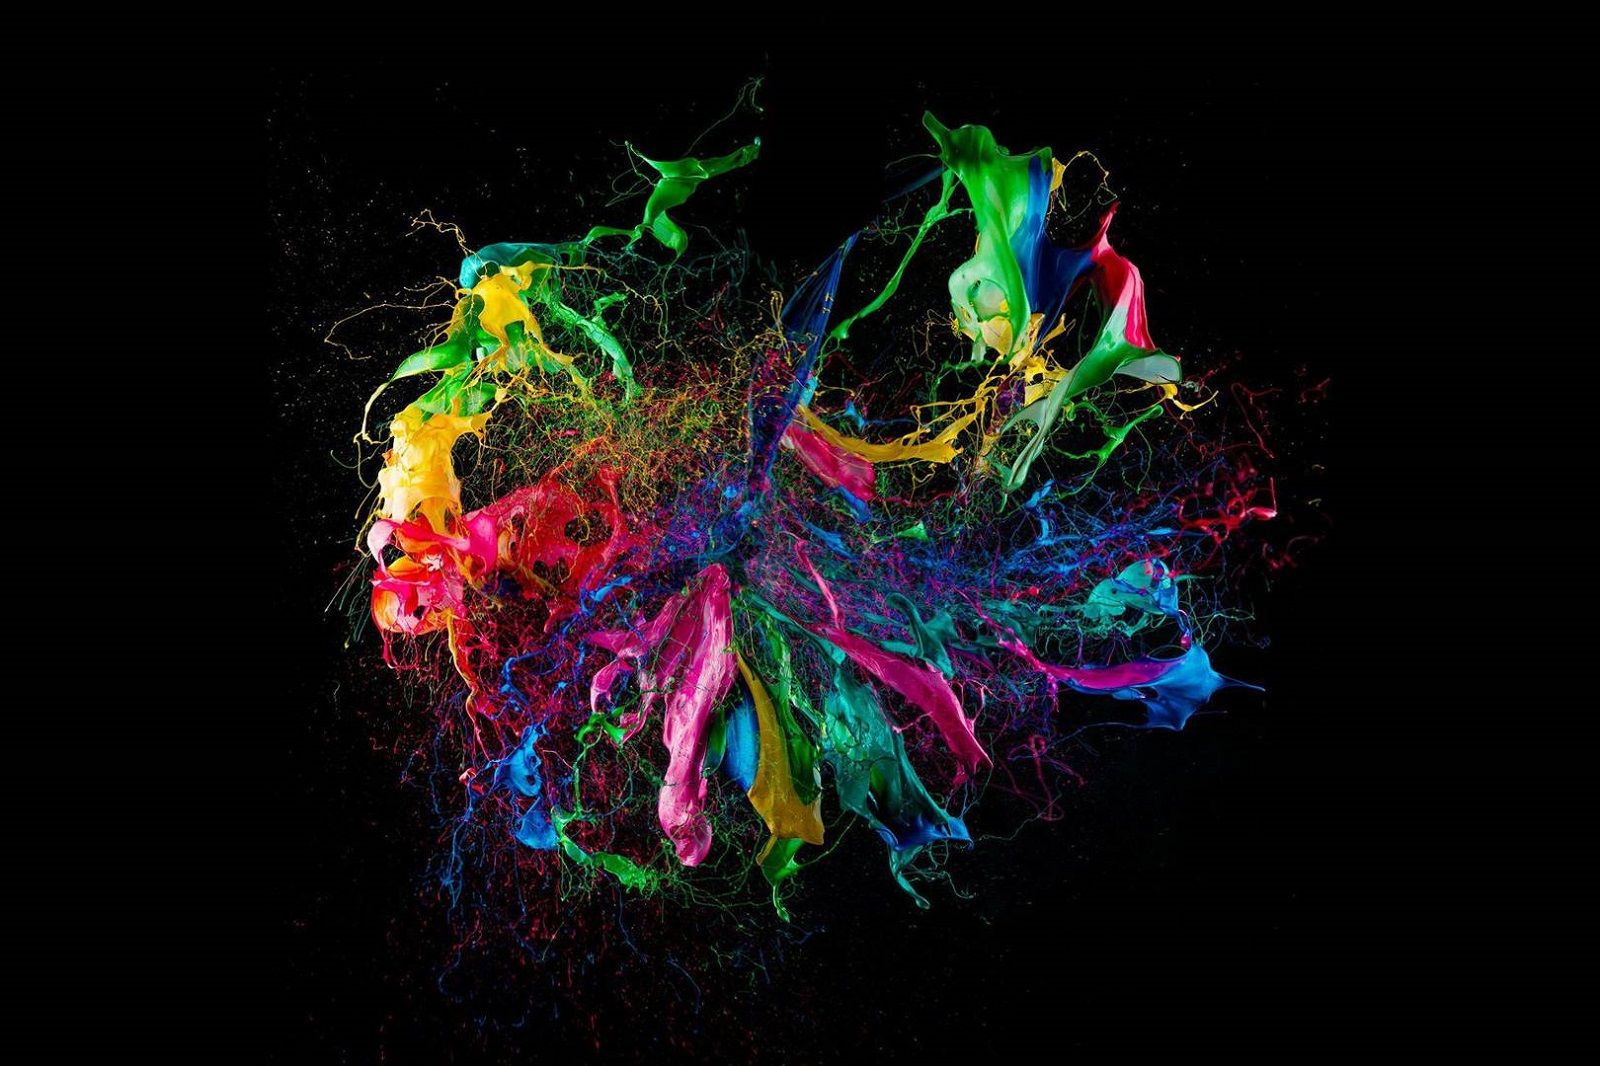 Fabian Oefner - Exploding Paint balloons high-speed photos image 3